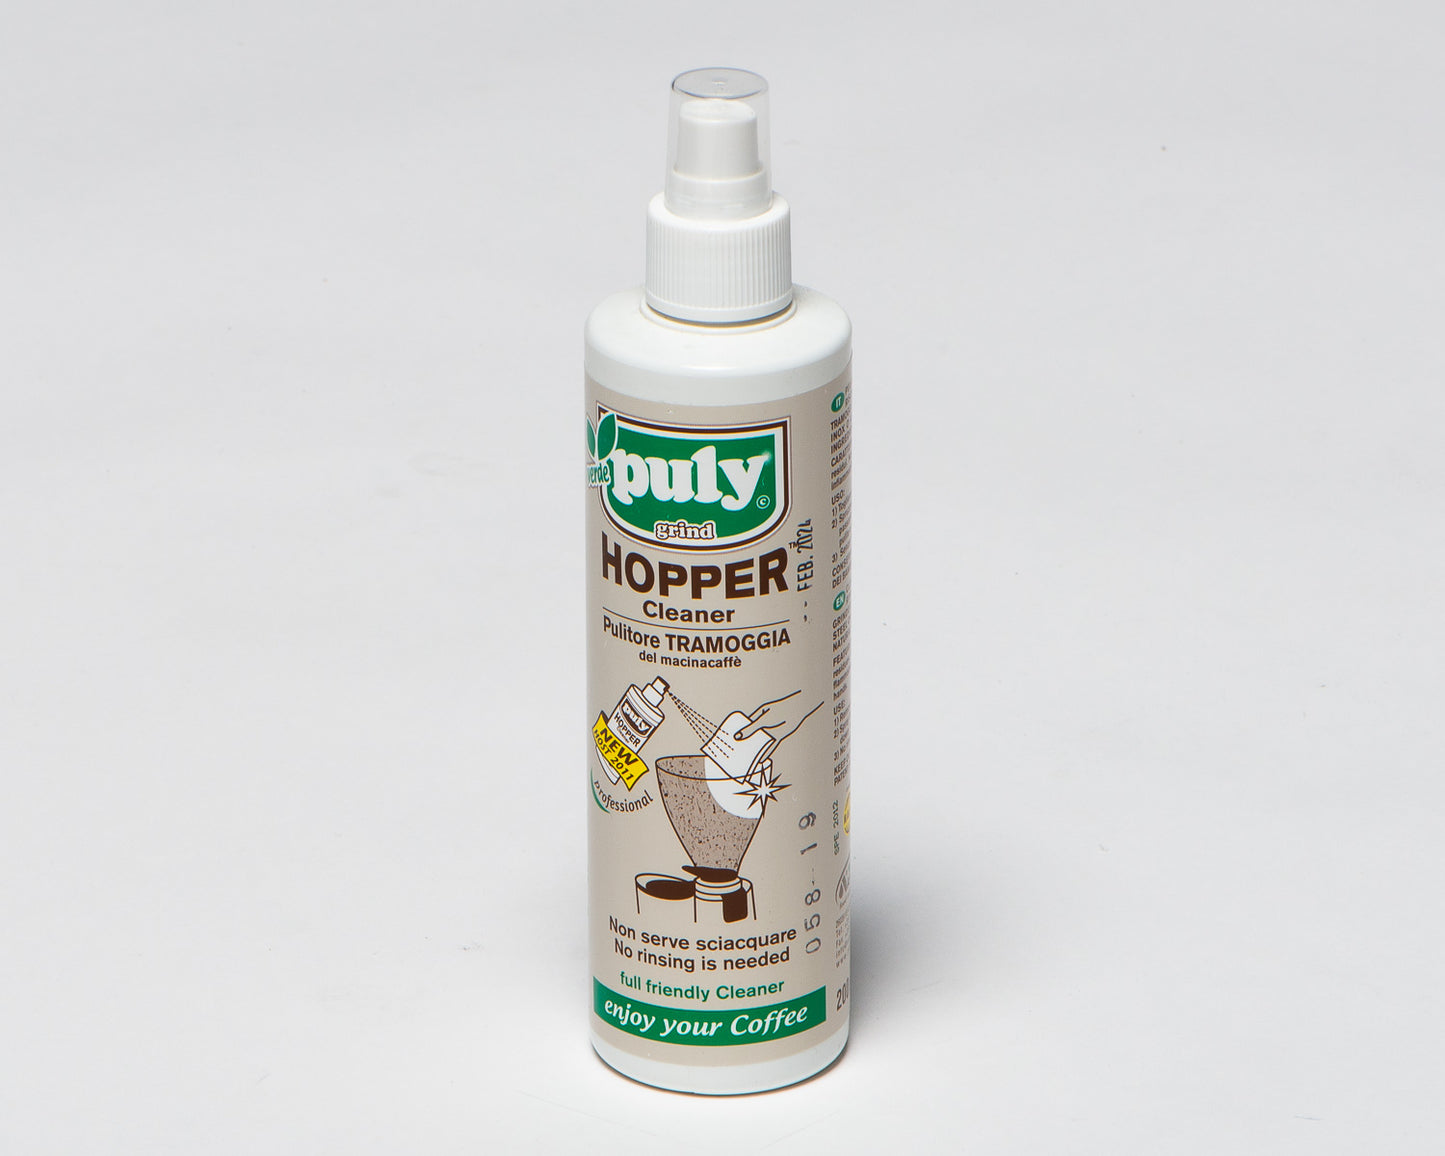 PULY Hopper Cleaner